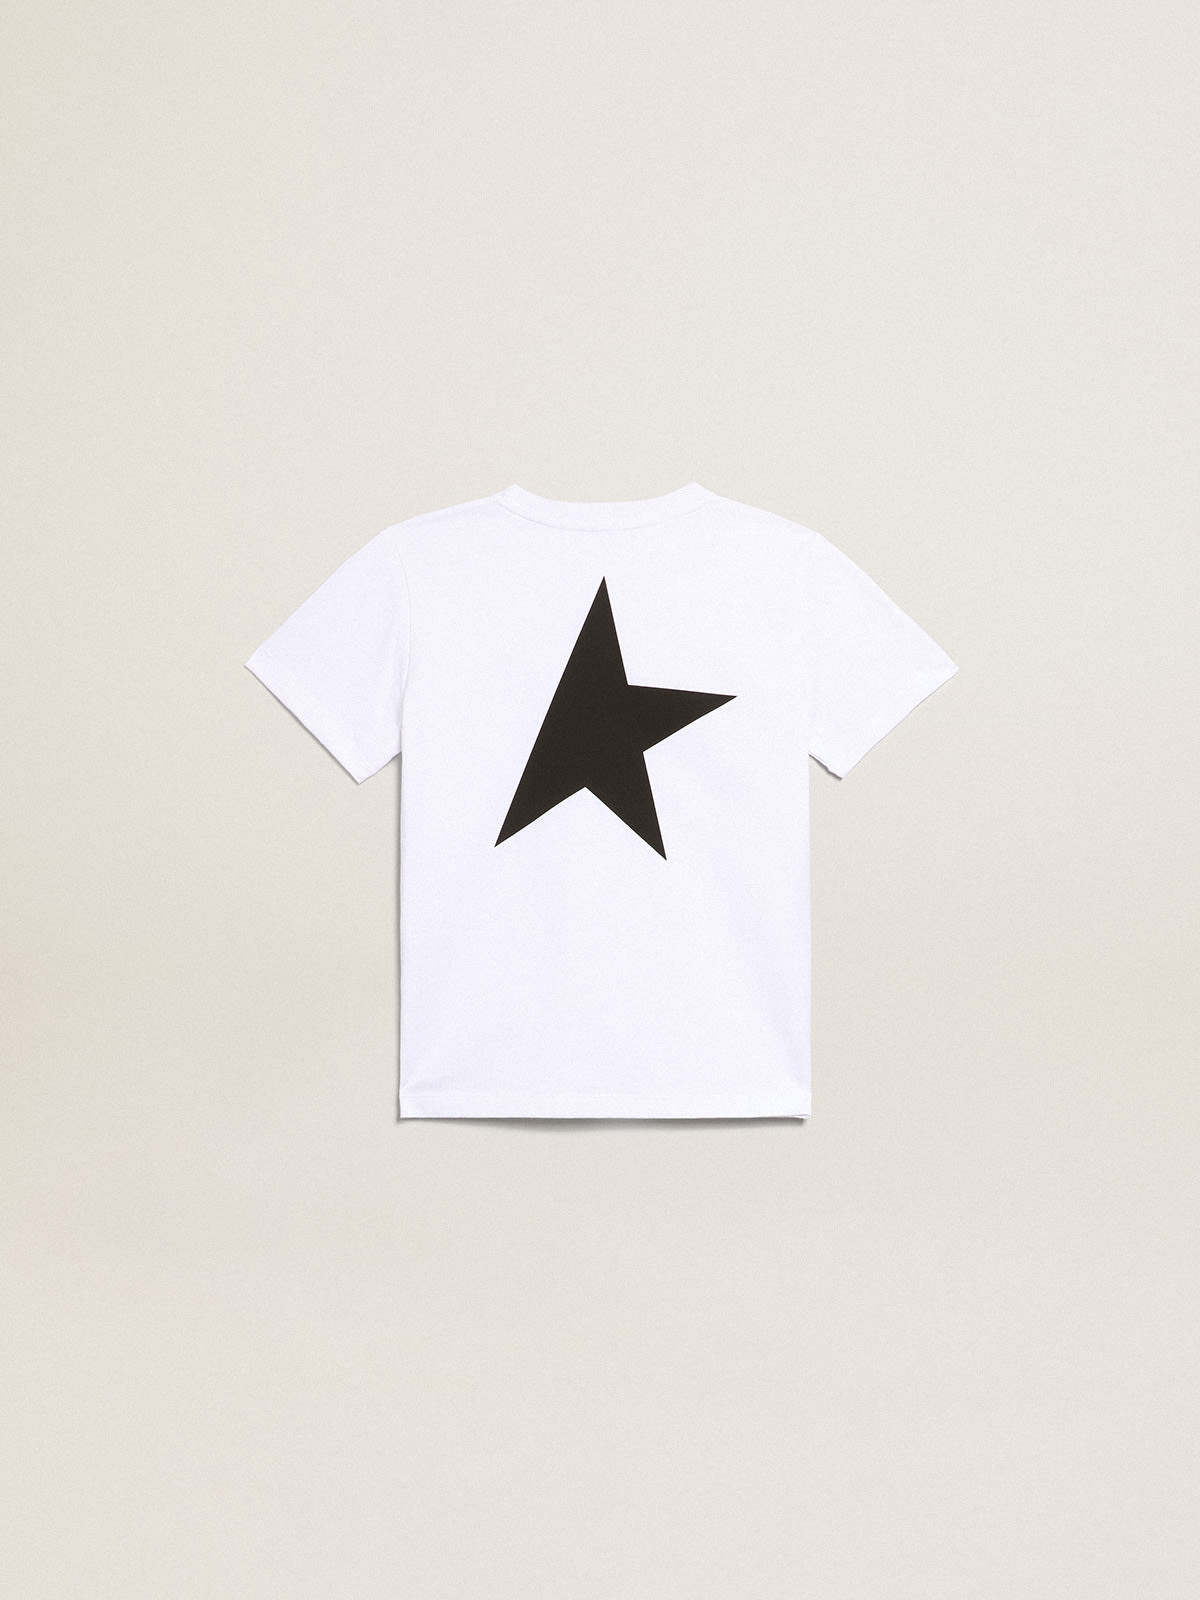 Golden Goose - White T-shirt with contrasting black logo and star in 